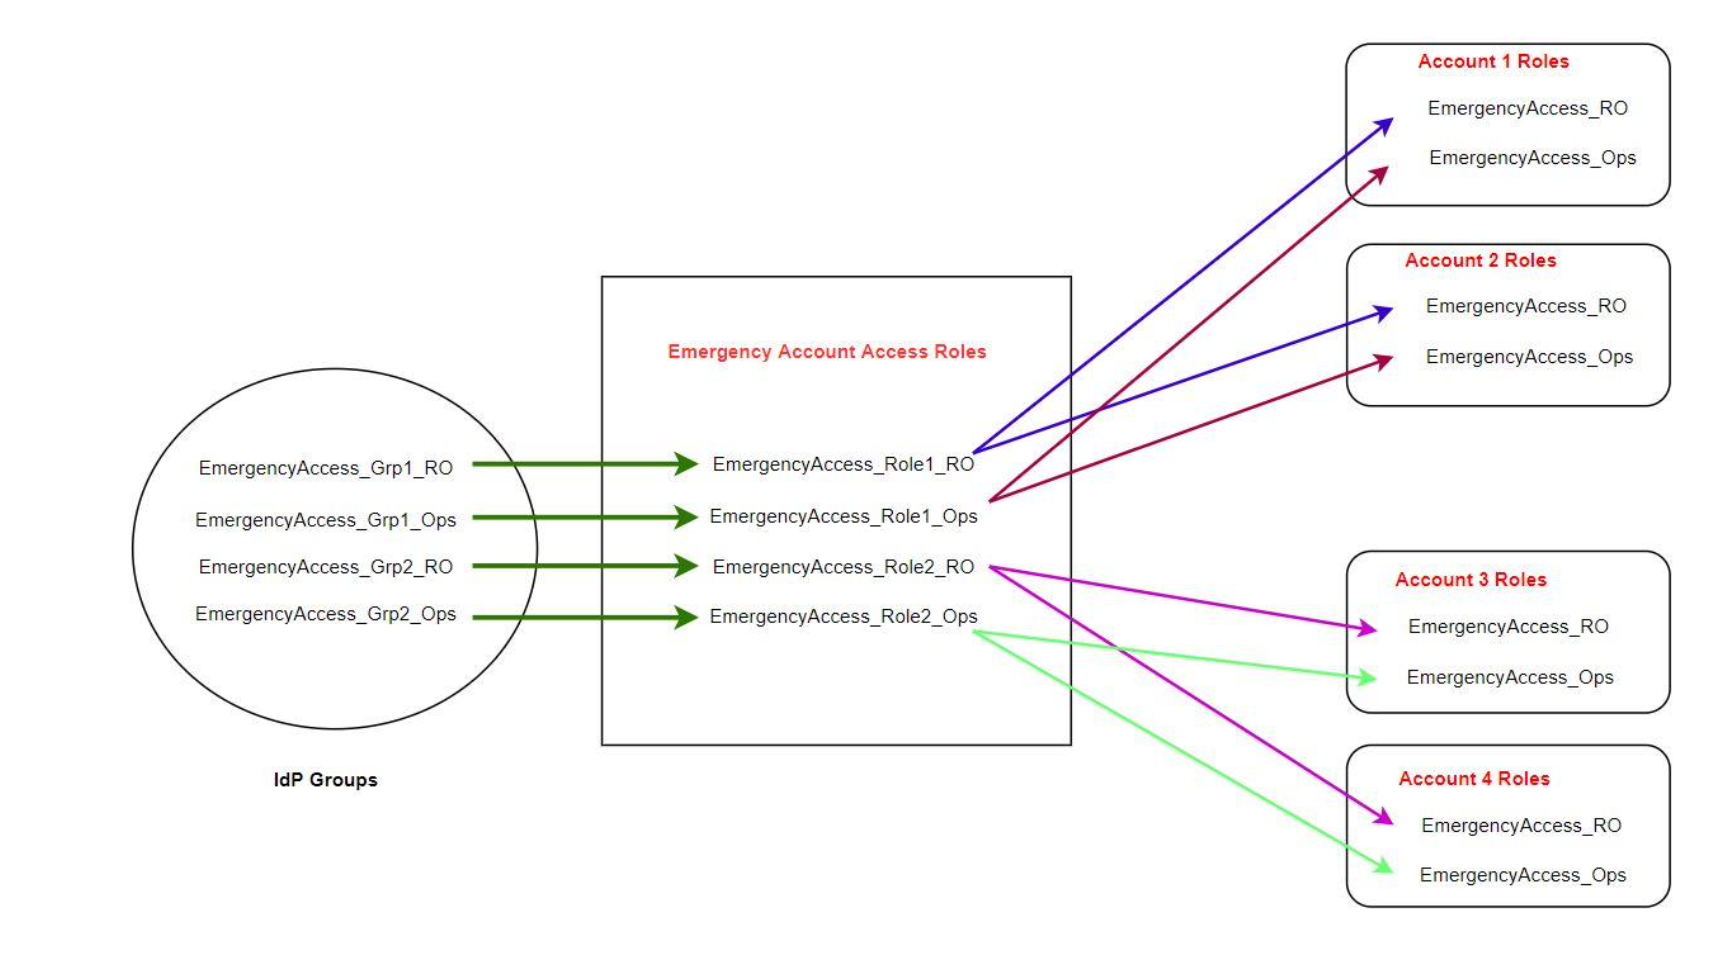 IAM Identity Center workflow: map emergency access groups to roles in emergency account.